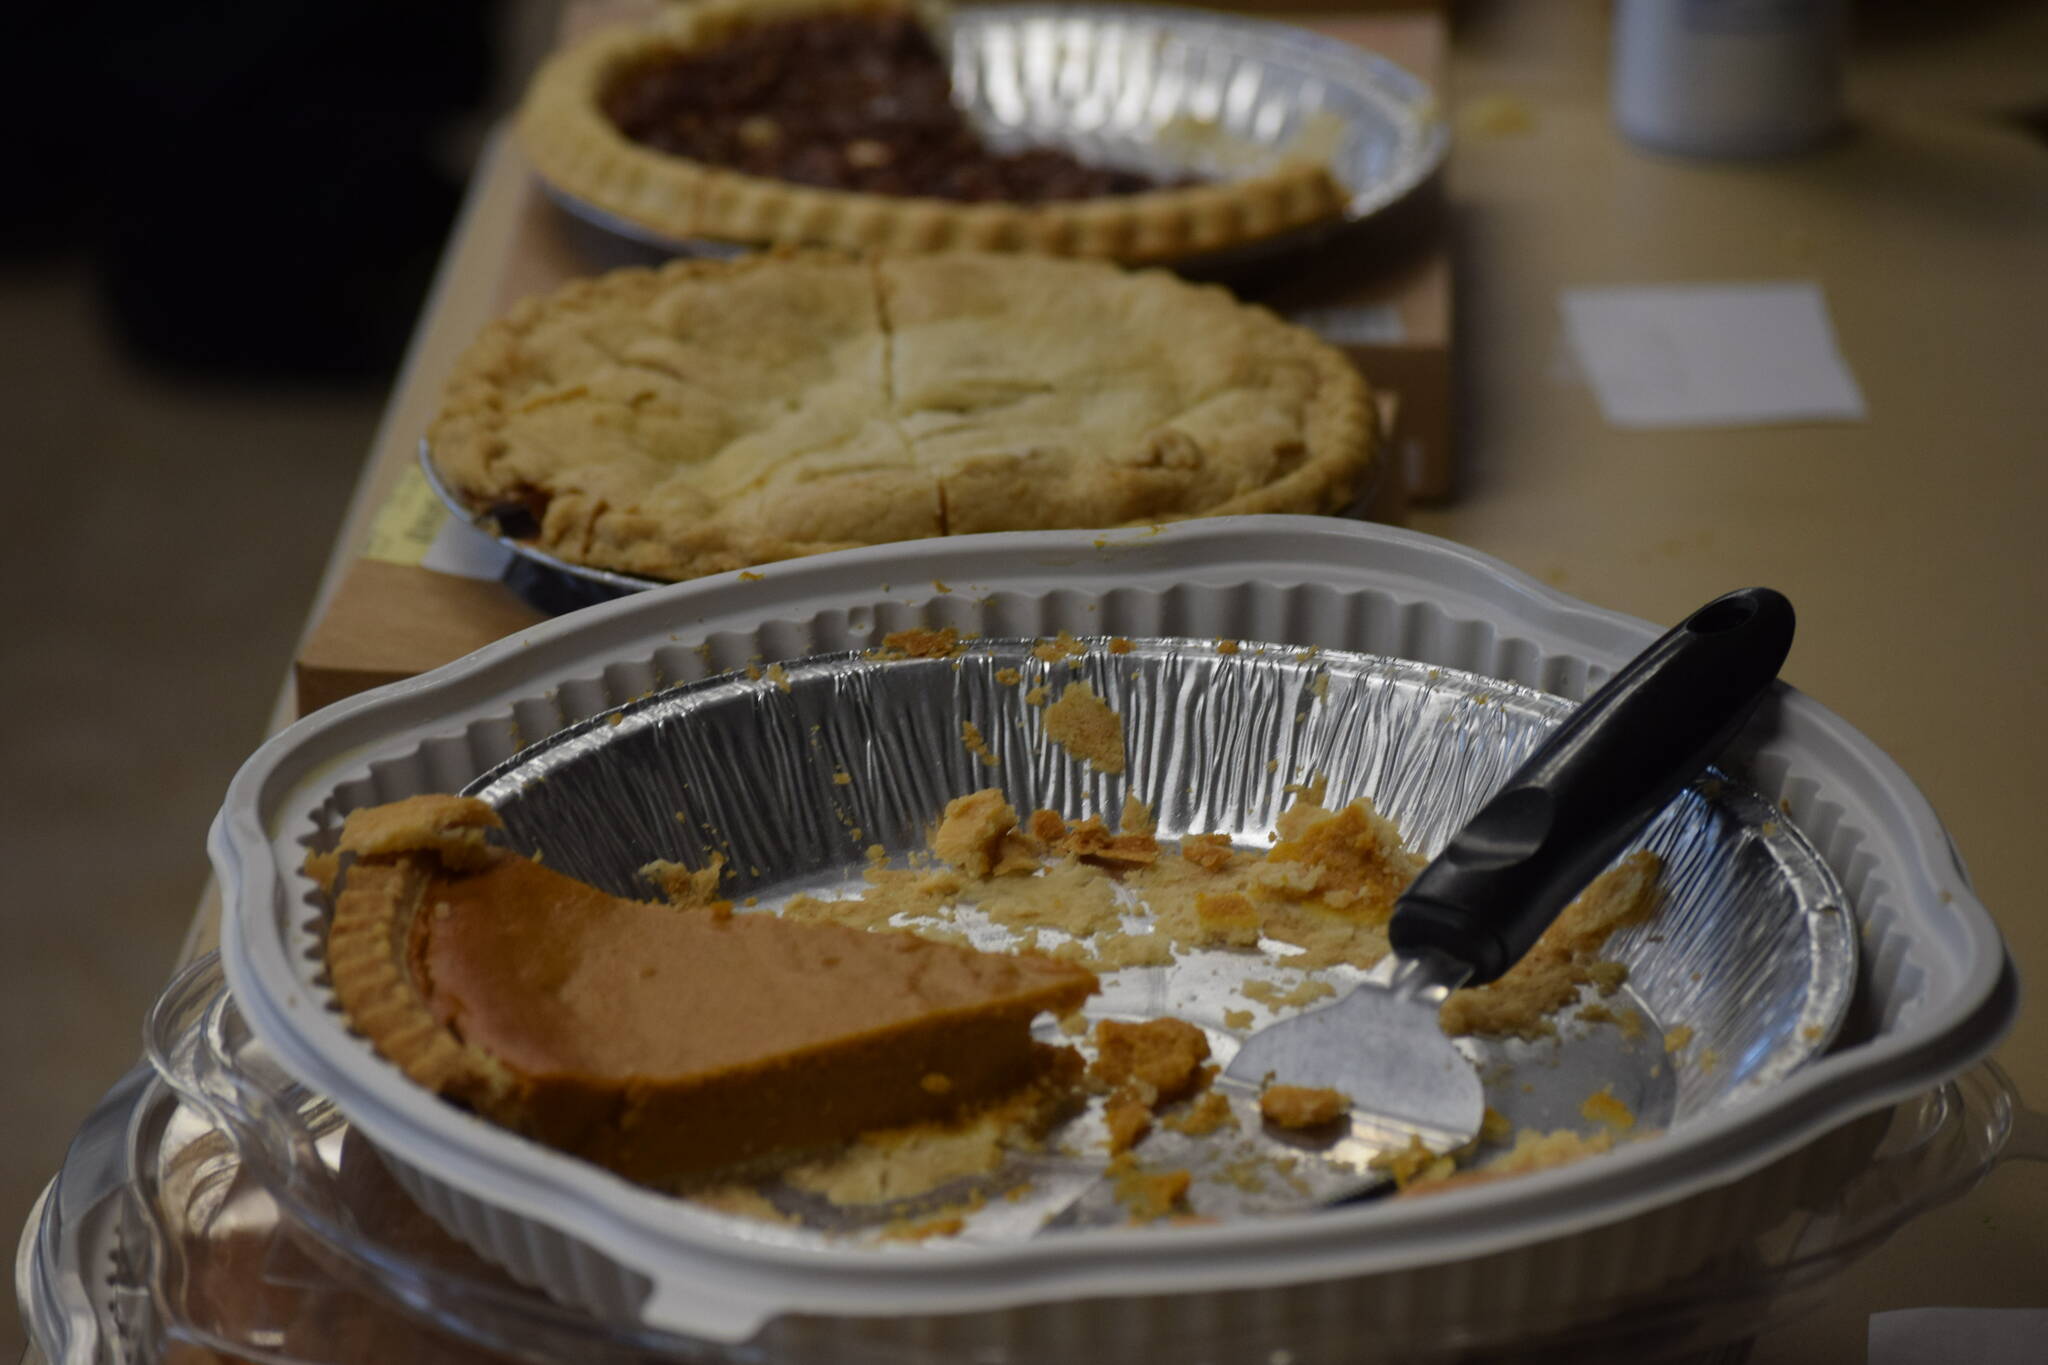 Pie slowly disappears during the Thanksgiving lunch at the Kenai Peninsula Food Bank on Wednesday, Nov. 24, 2021. (Camille Botello/Peninsula Clarion)